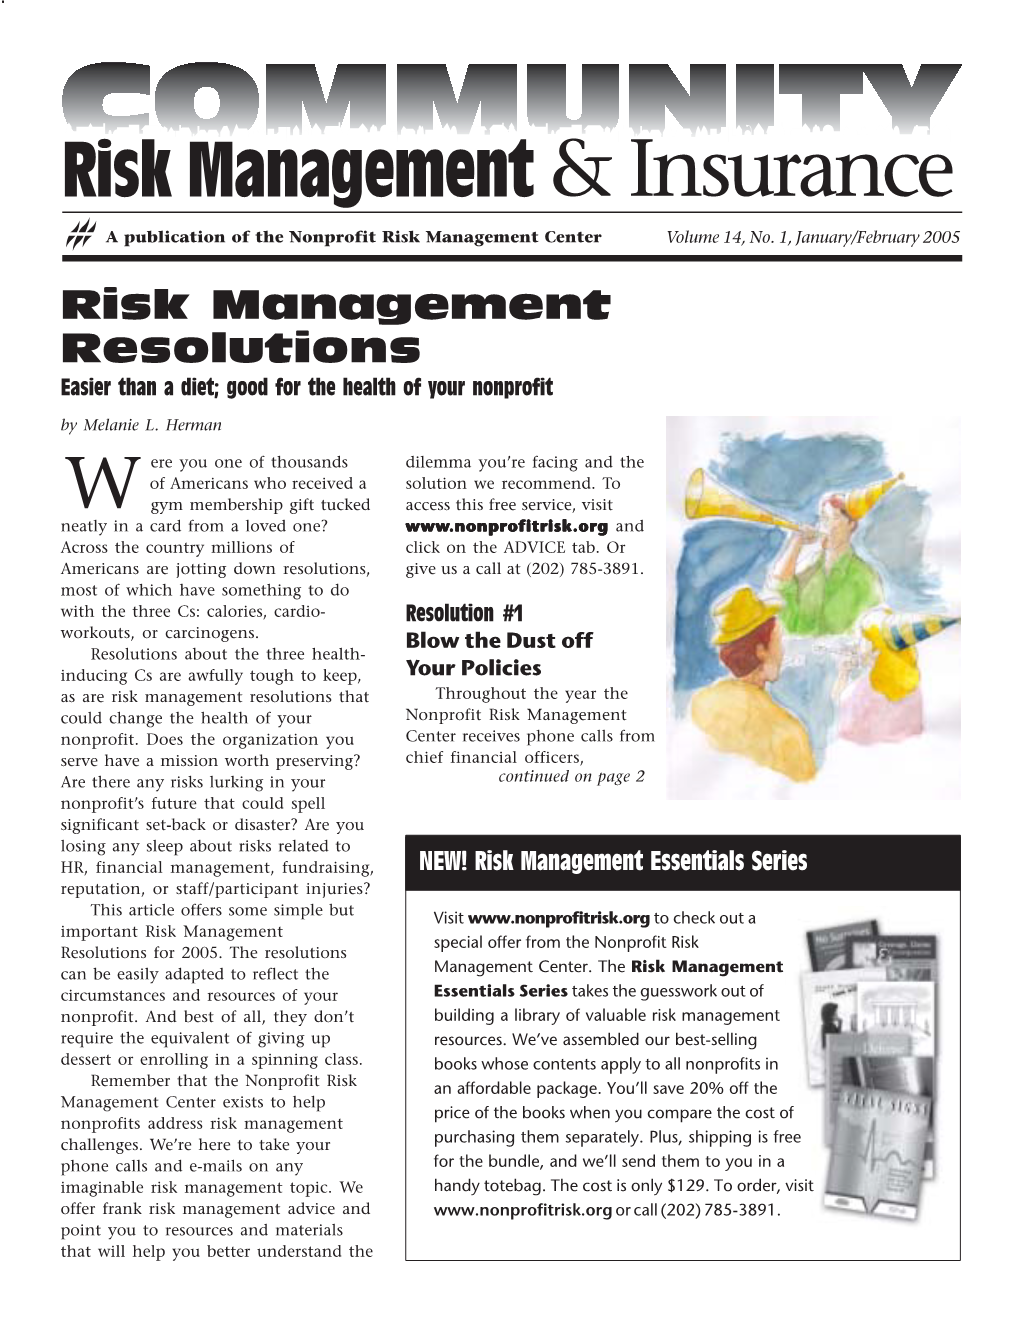 Risk Management Resolutions Easier Than a Diet; Good for the Health of Your Nonprofit by Melanie L